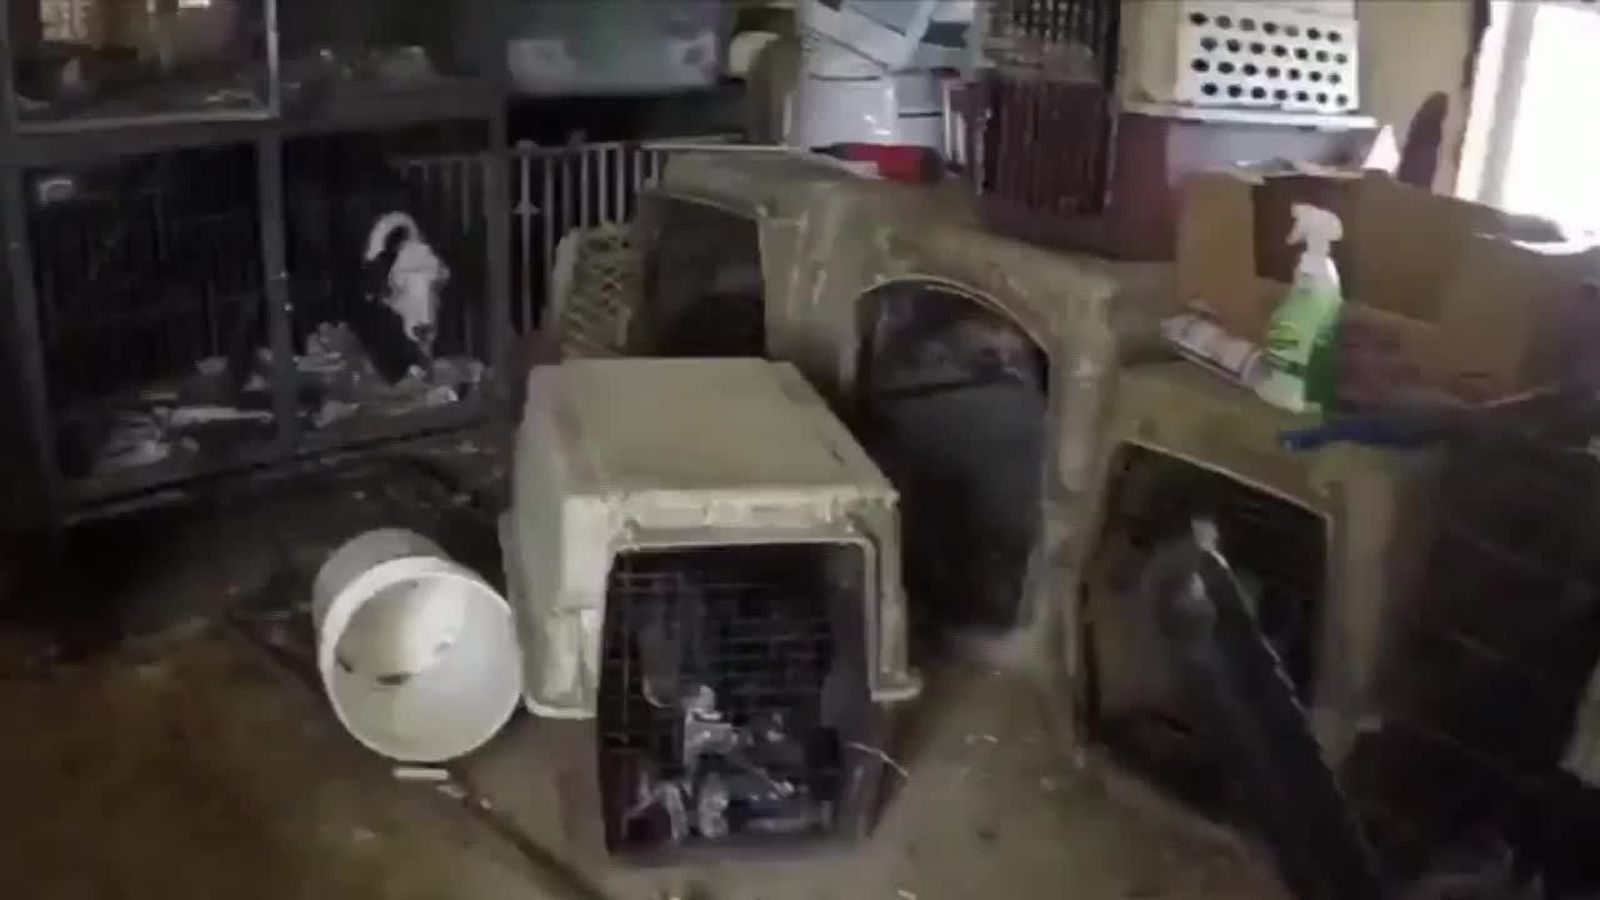 Dogs freed from cages as Iowa floods rise | US News | Sky News